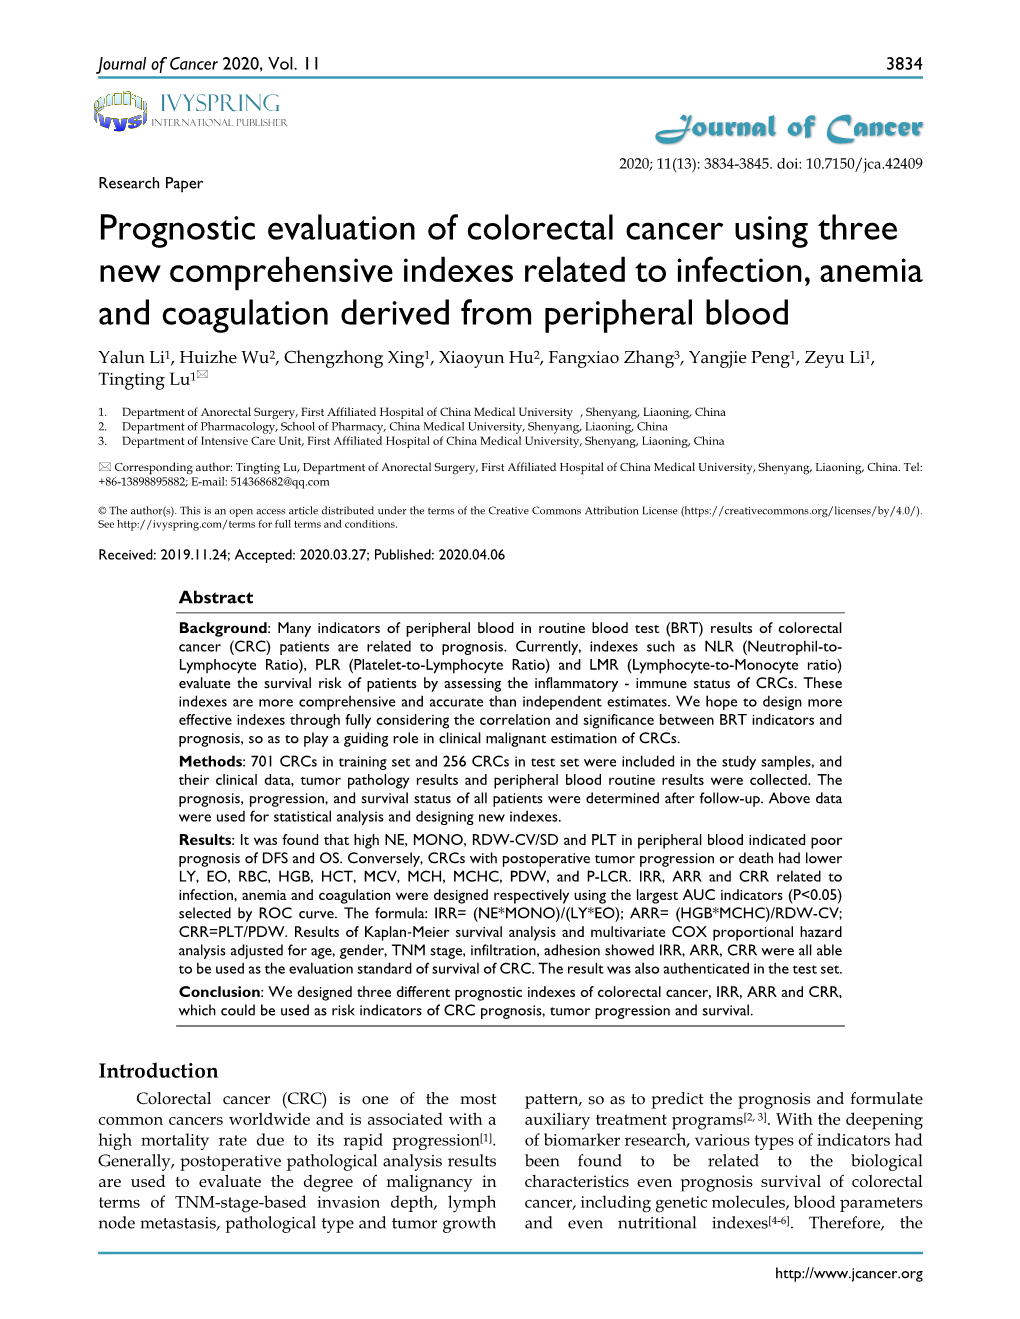 Prognostic Evaluation of Colorectal Cancer Using Three New